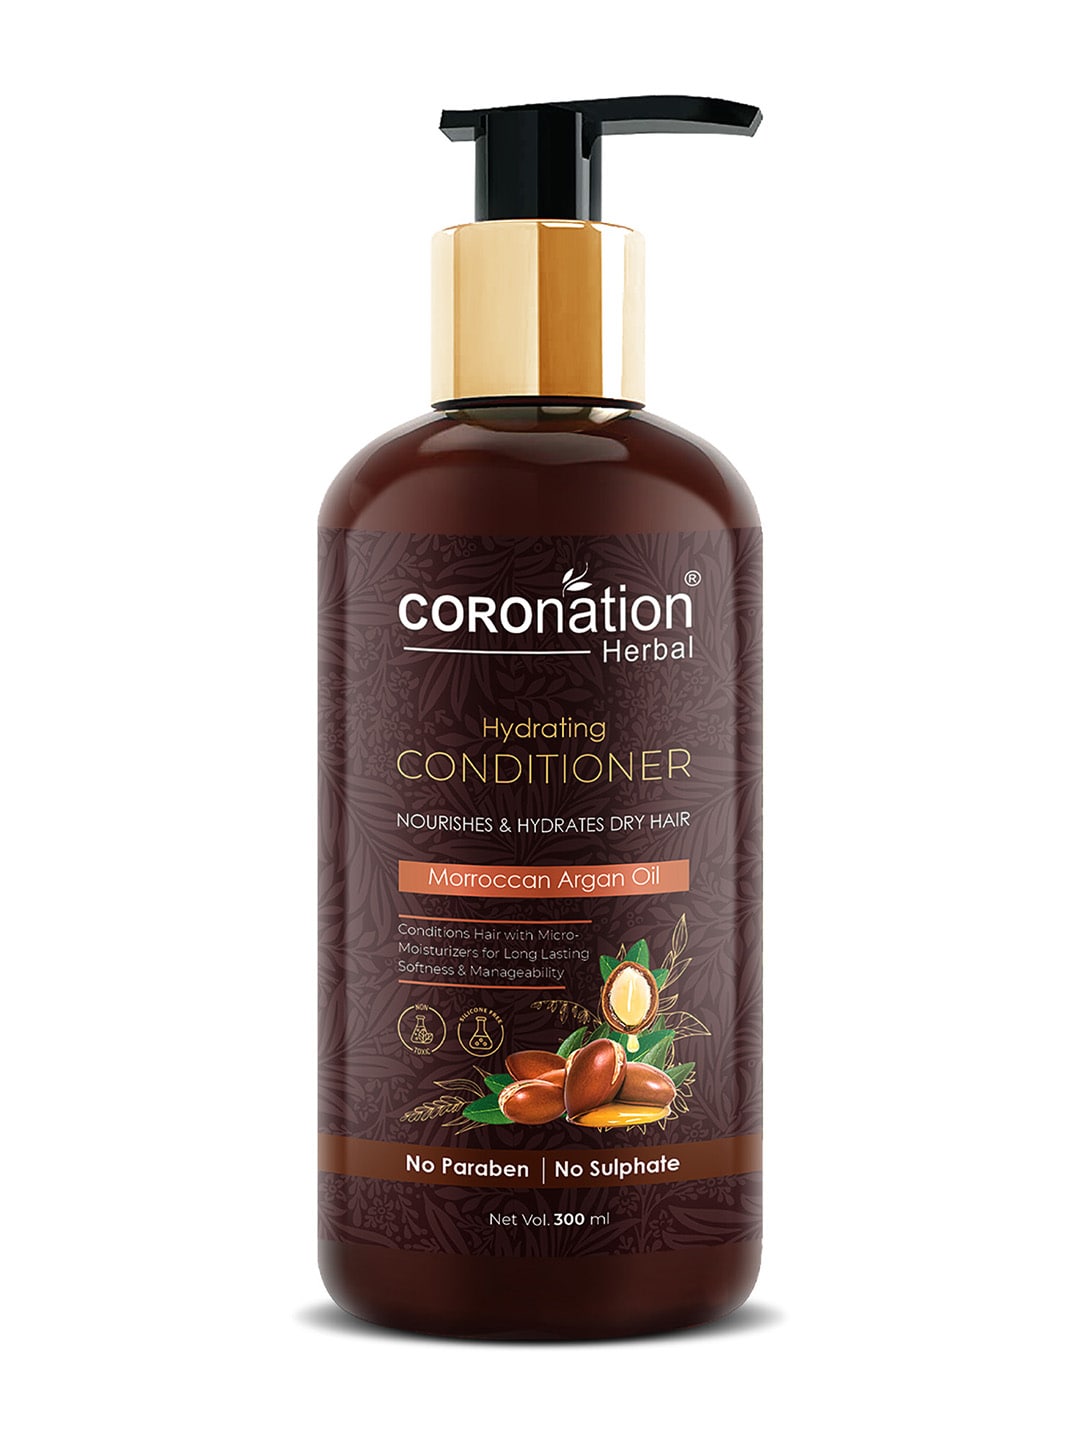 COROnation Herbal Hydrating Conditioner with Moroccan Argan Oil 300 ml Price in India